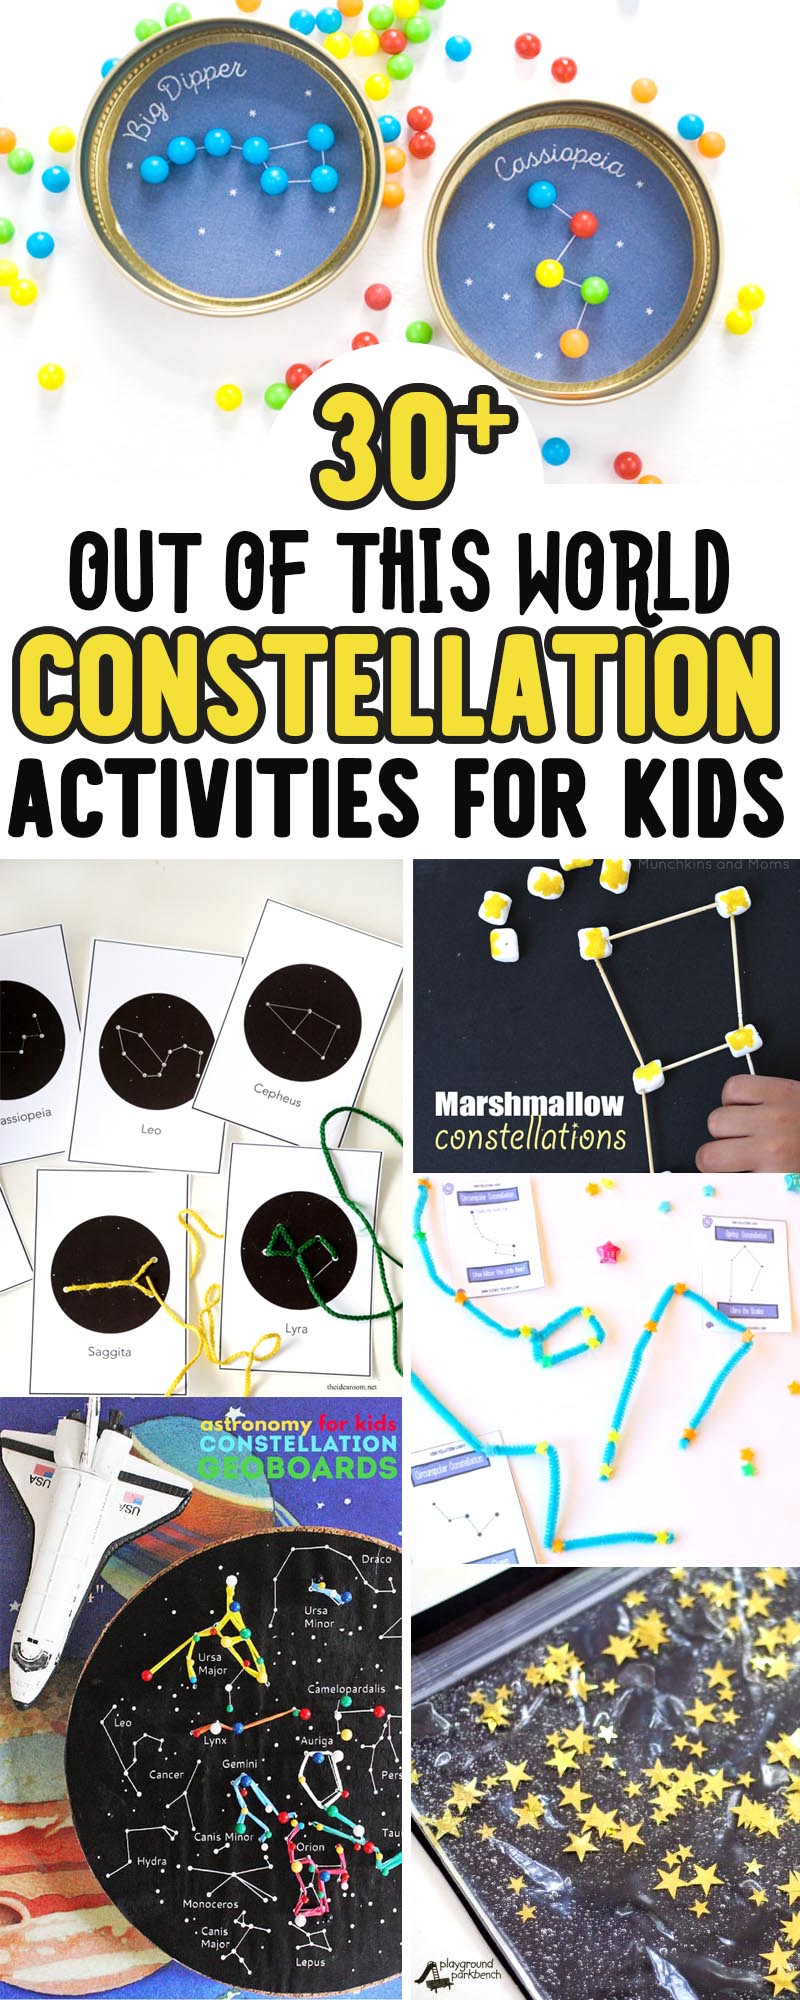 Let your kids explore the night sky through art, play and more with these 30+ Constellation Activities for Kids of all ages. From fine motor challenges for preschoolers, sensory play for toddlers, to more challenging viewers and light up constellations for older kids 